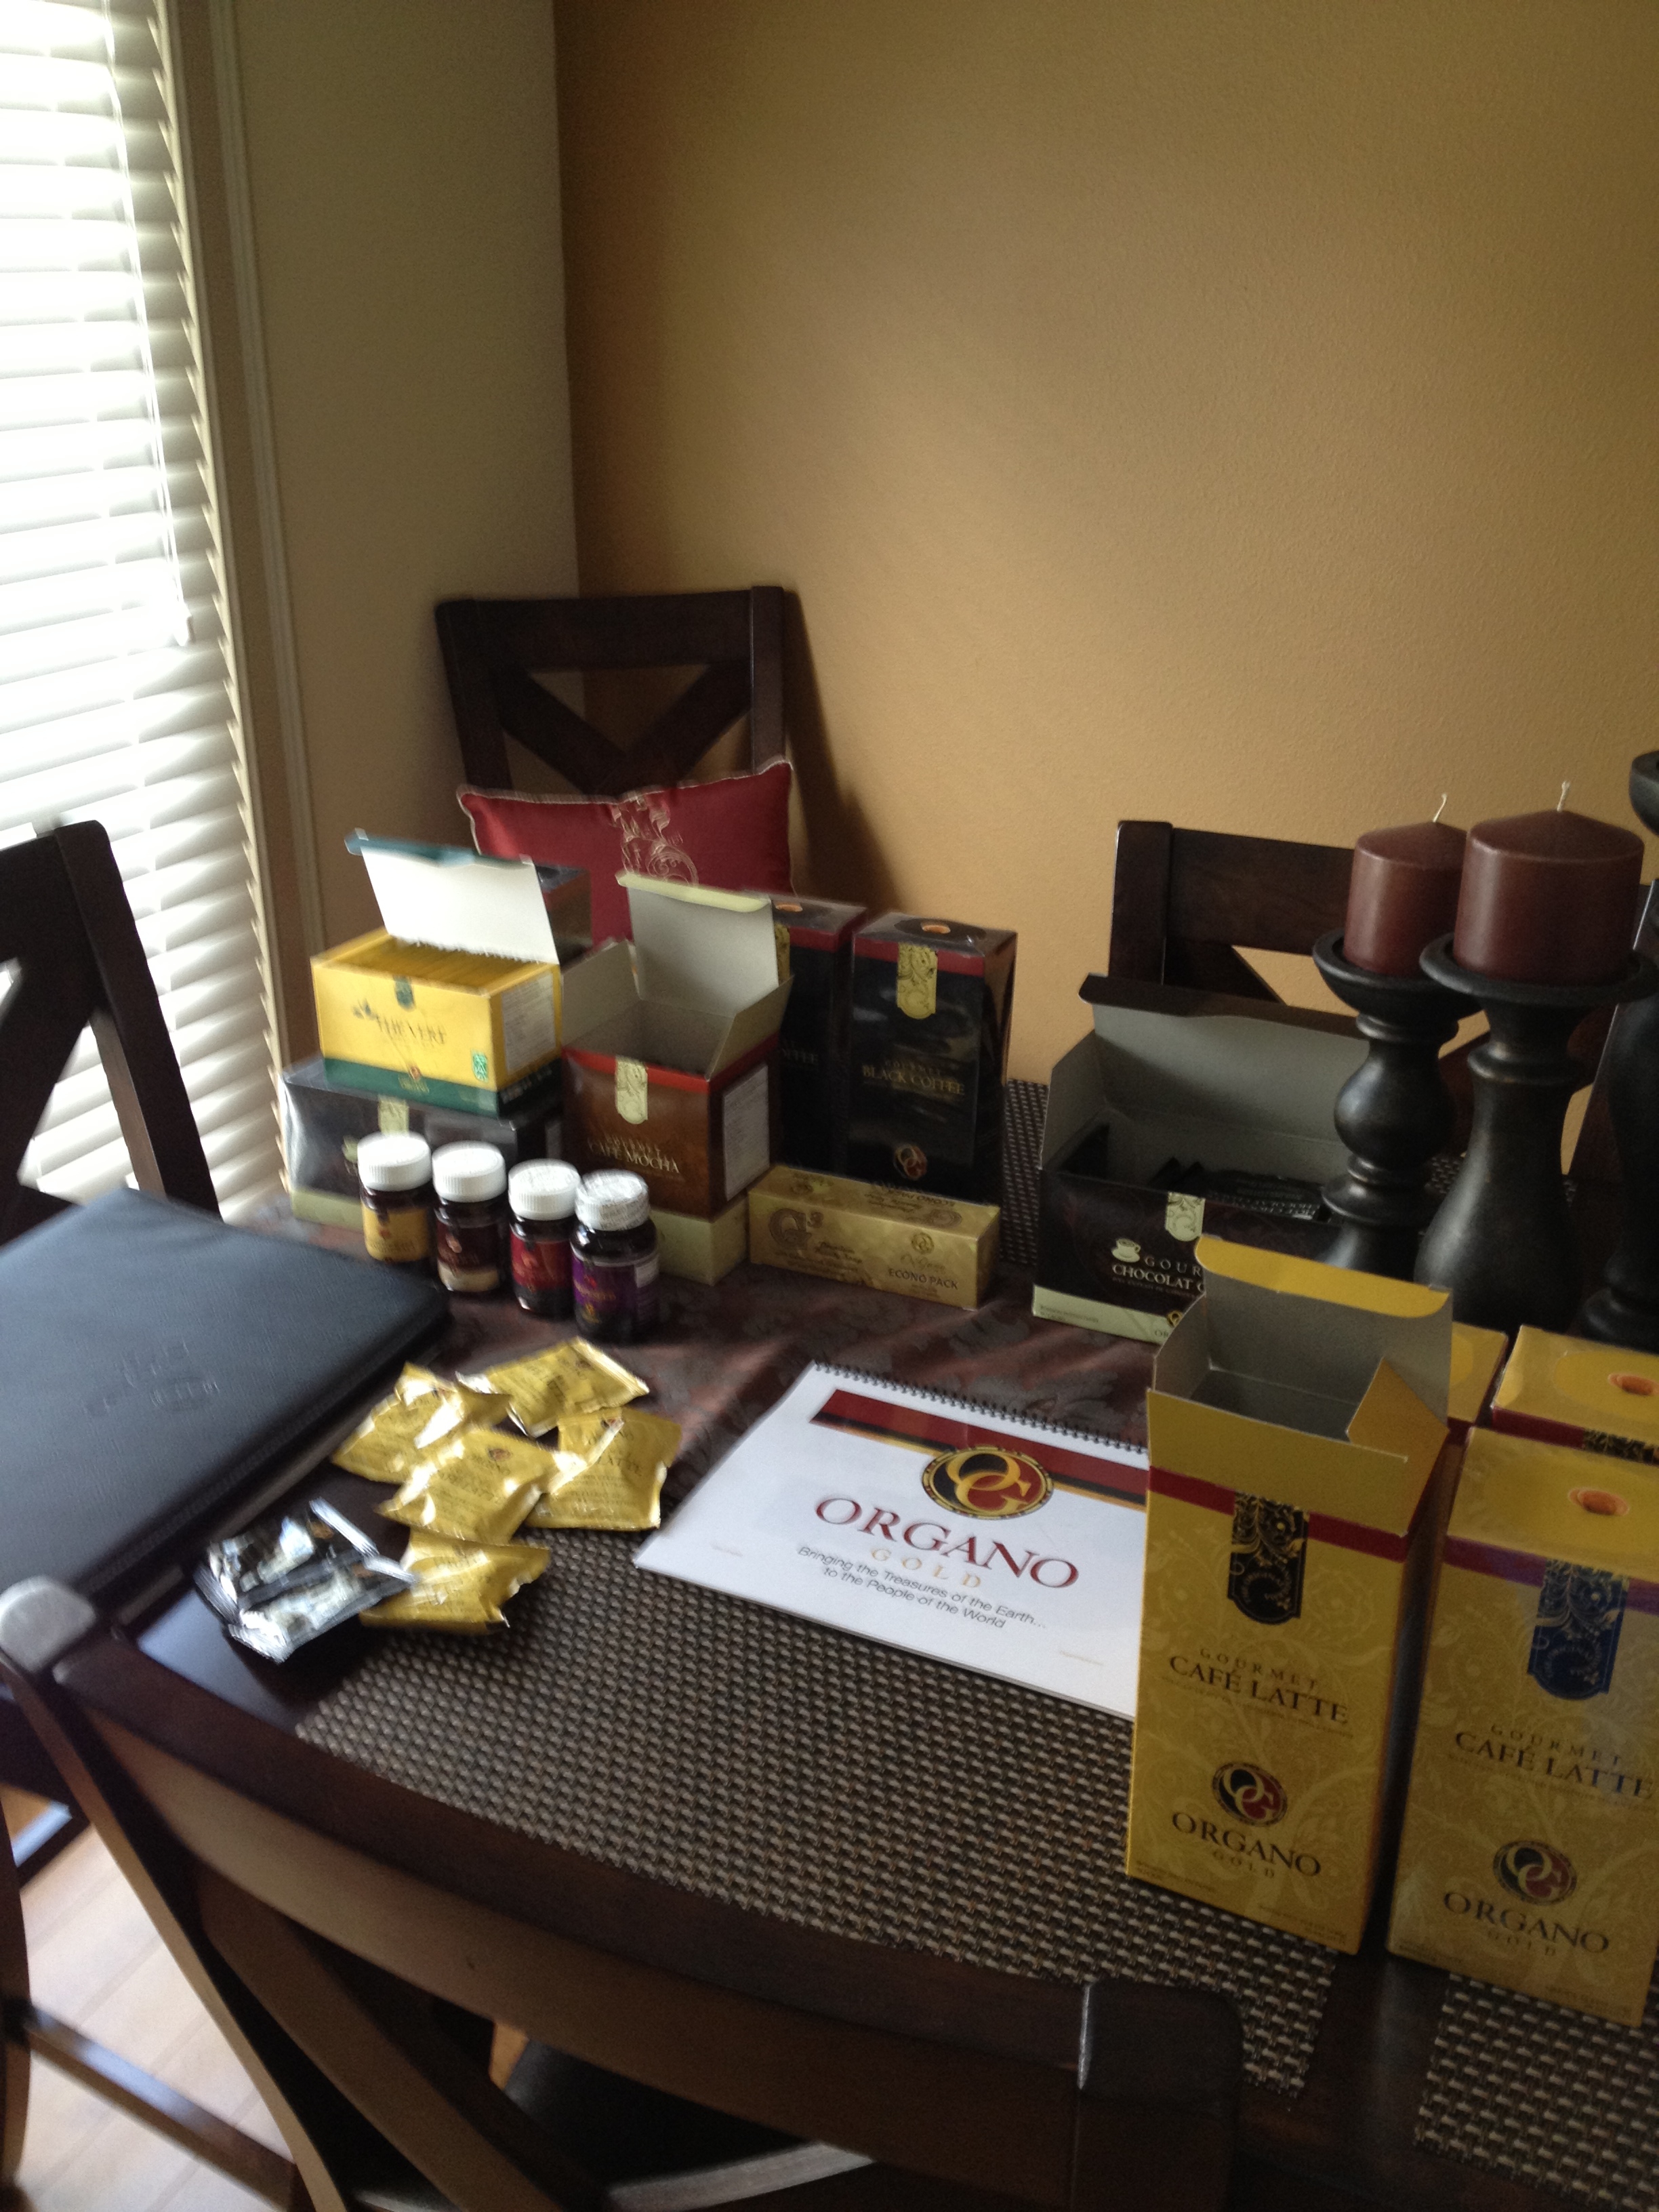 What are the main complaints about Organo Gold?